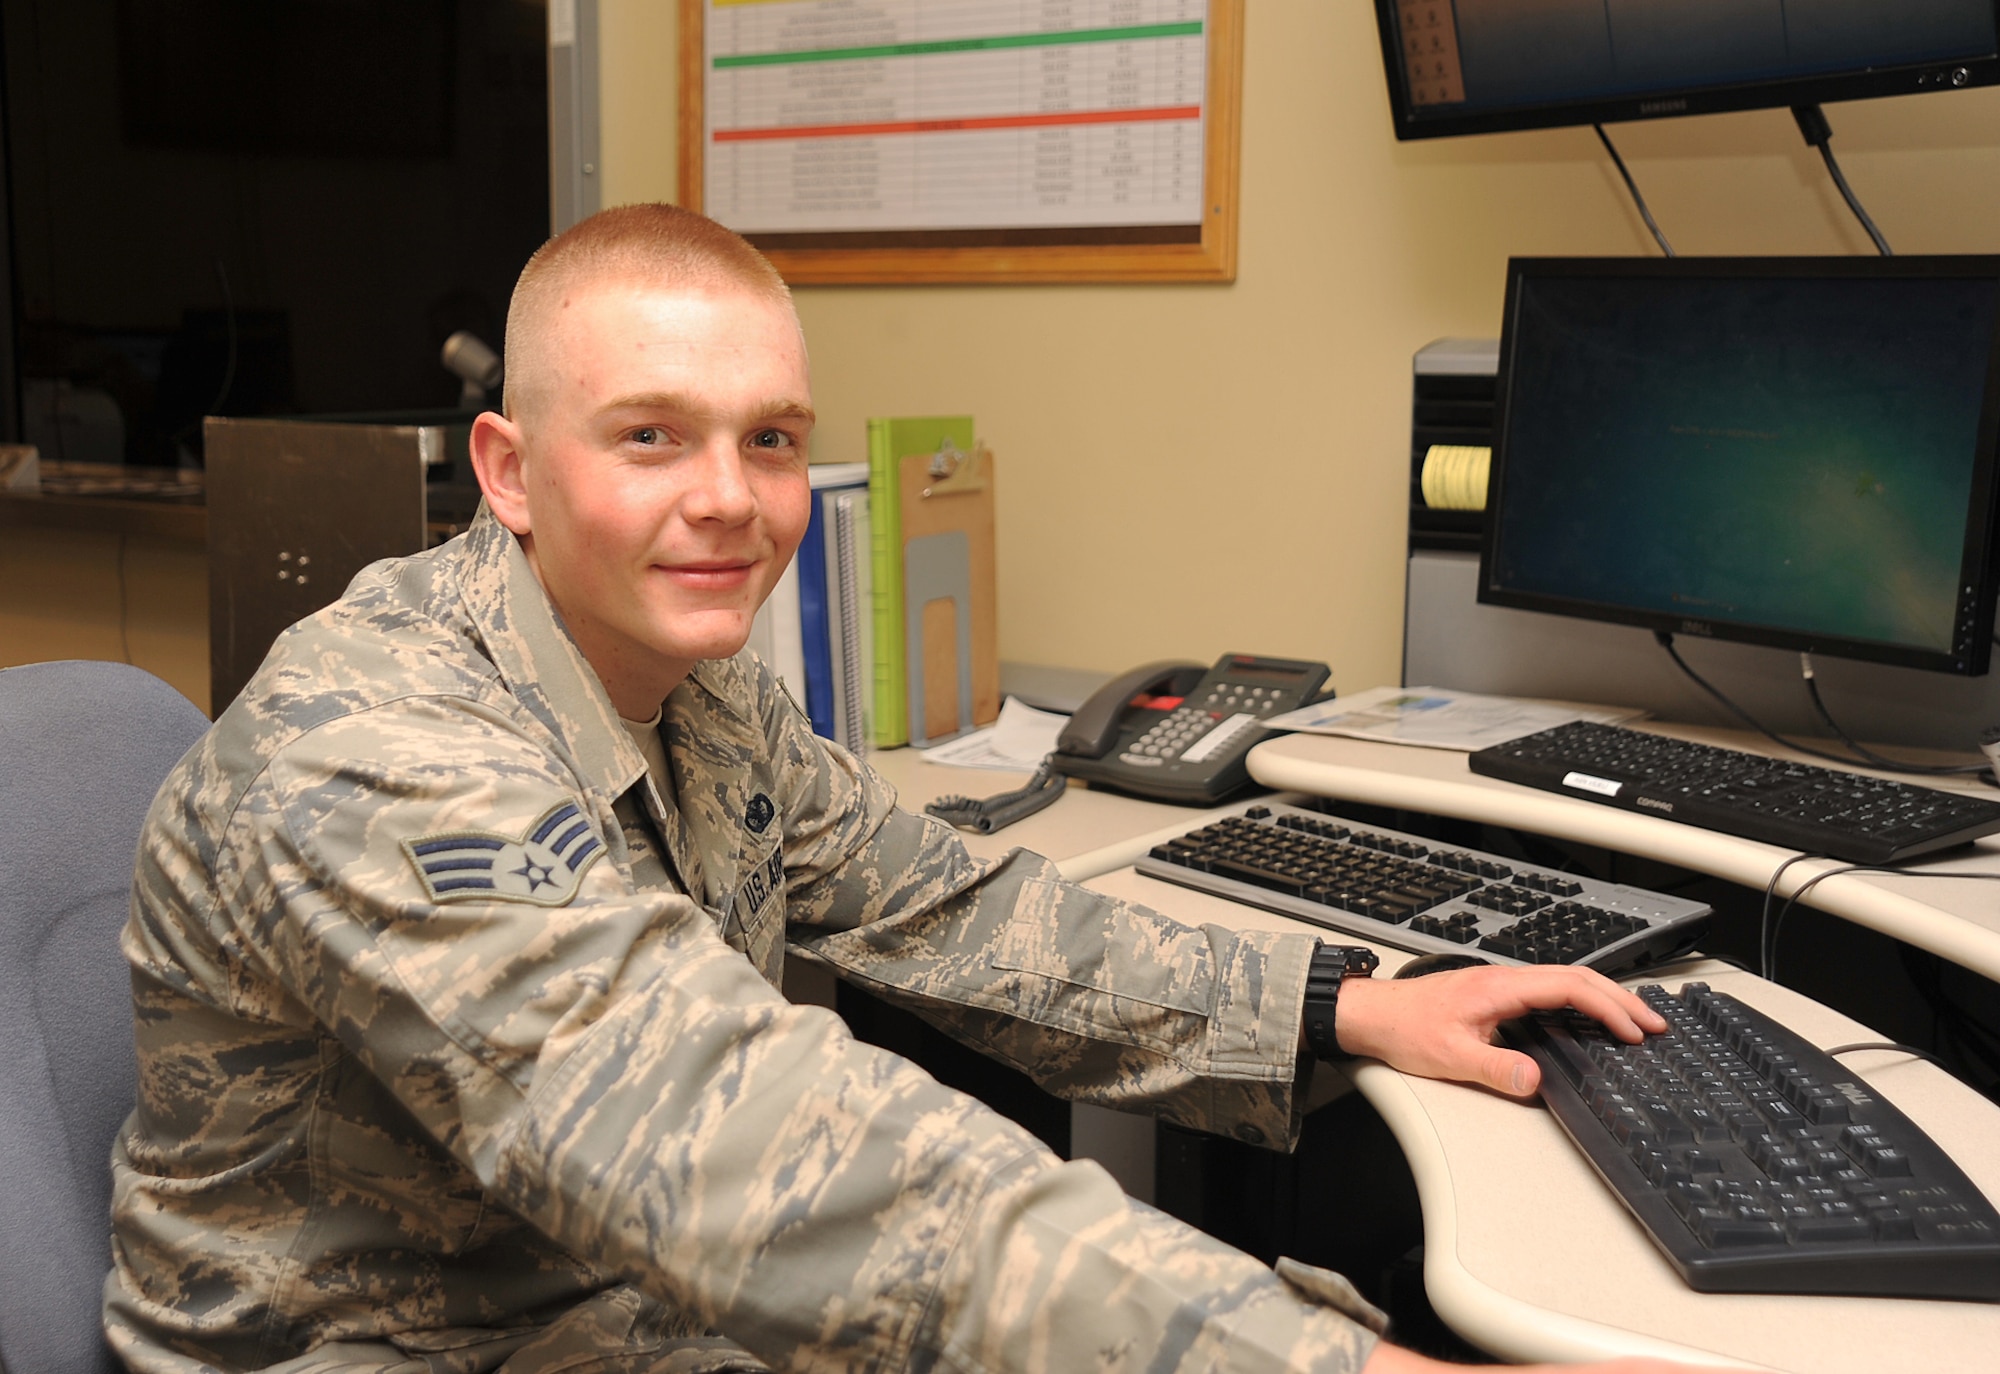 Senior Airman Sean Egan, 319th Security Forces Squadron alarm monitor, logs on to the computer to monitor live surveillance footage to detect any suspicious activity on Grand Forks Air Force Base, N.D., April 24, 2015. Egan was selected as the Warrior of the Week for the last week in April. (U.S. Air Force photo by Airman 1st Class Bonnie Grantham/Released)